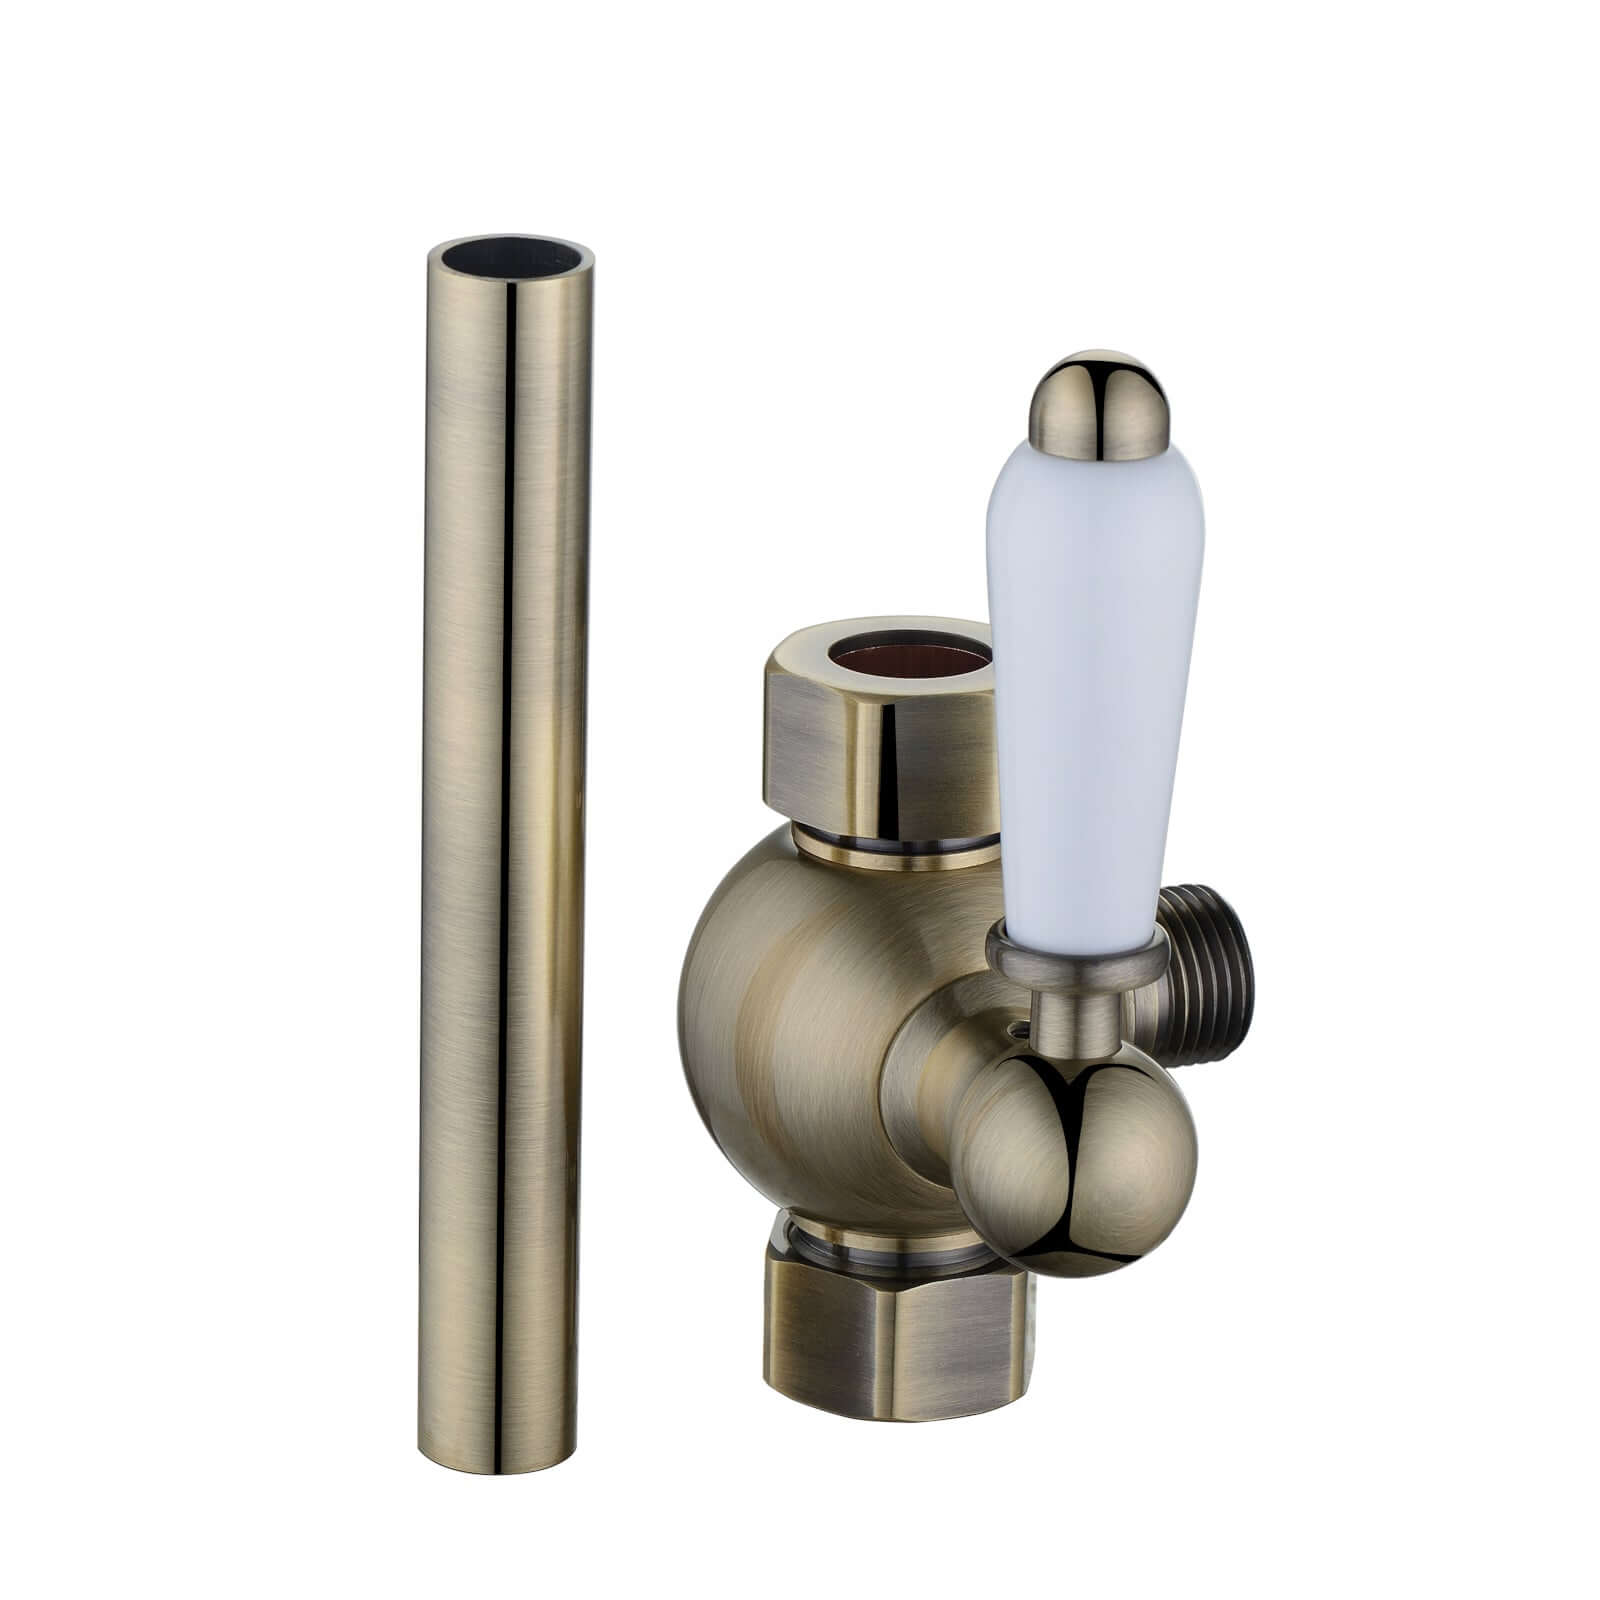 Downton traditional shower diverter with 18mm diameter extension pipe - antique bronze - Showers